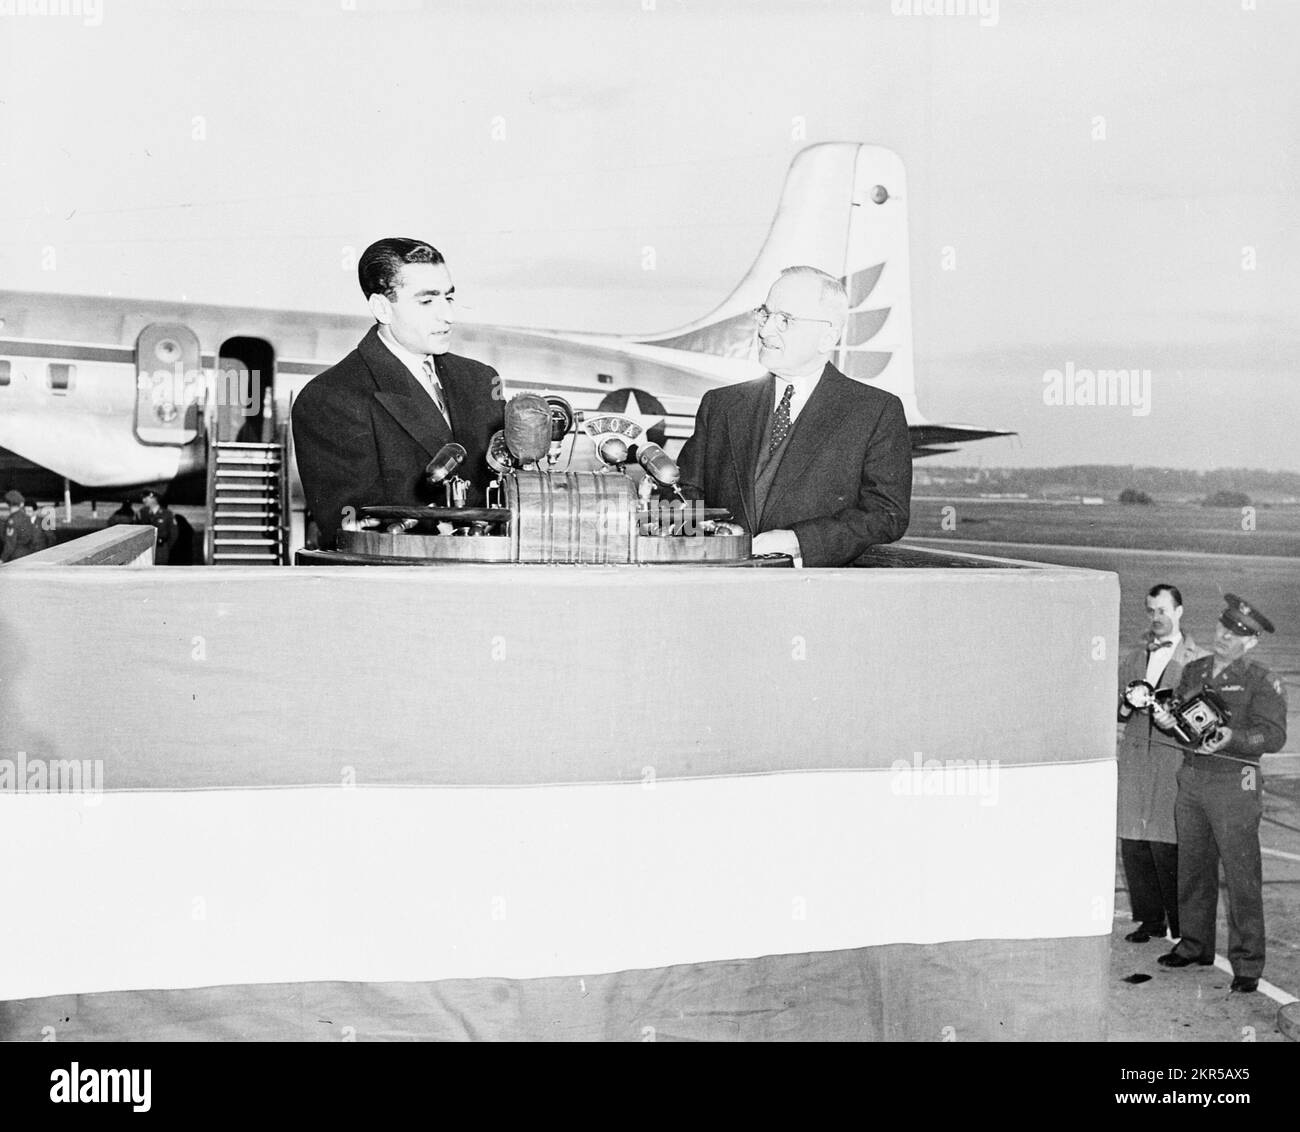 US President Harry S Truman and Shah of Iran Mohammad Reza Pahlavi speaking at Washington National Airport, during ceremonies welcoming him to the United States Stock Photo